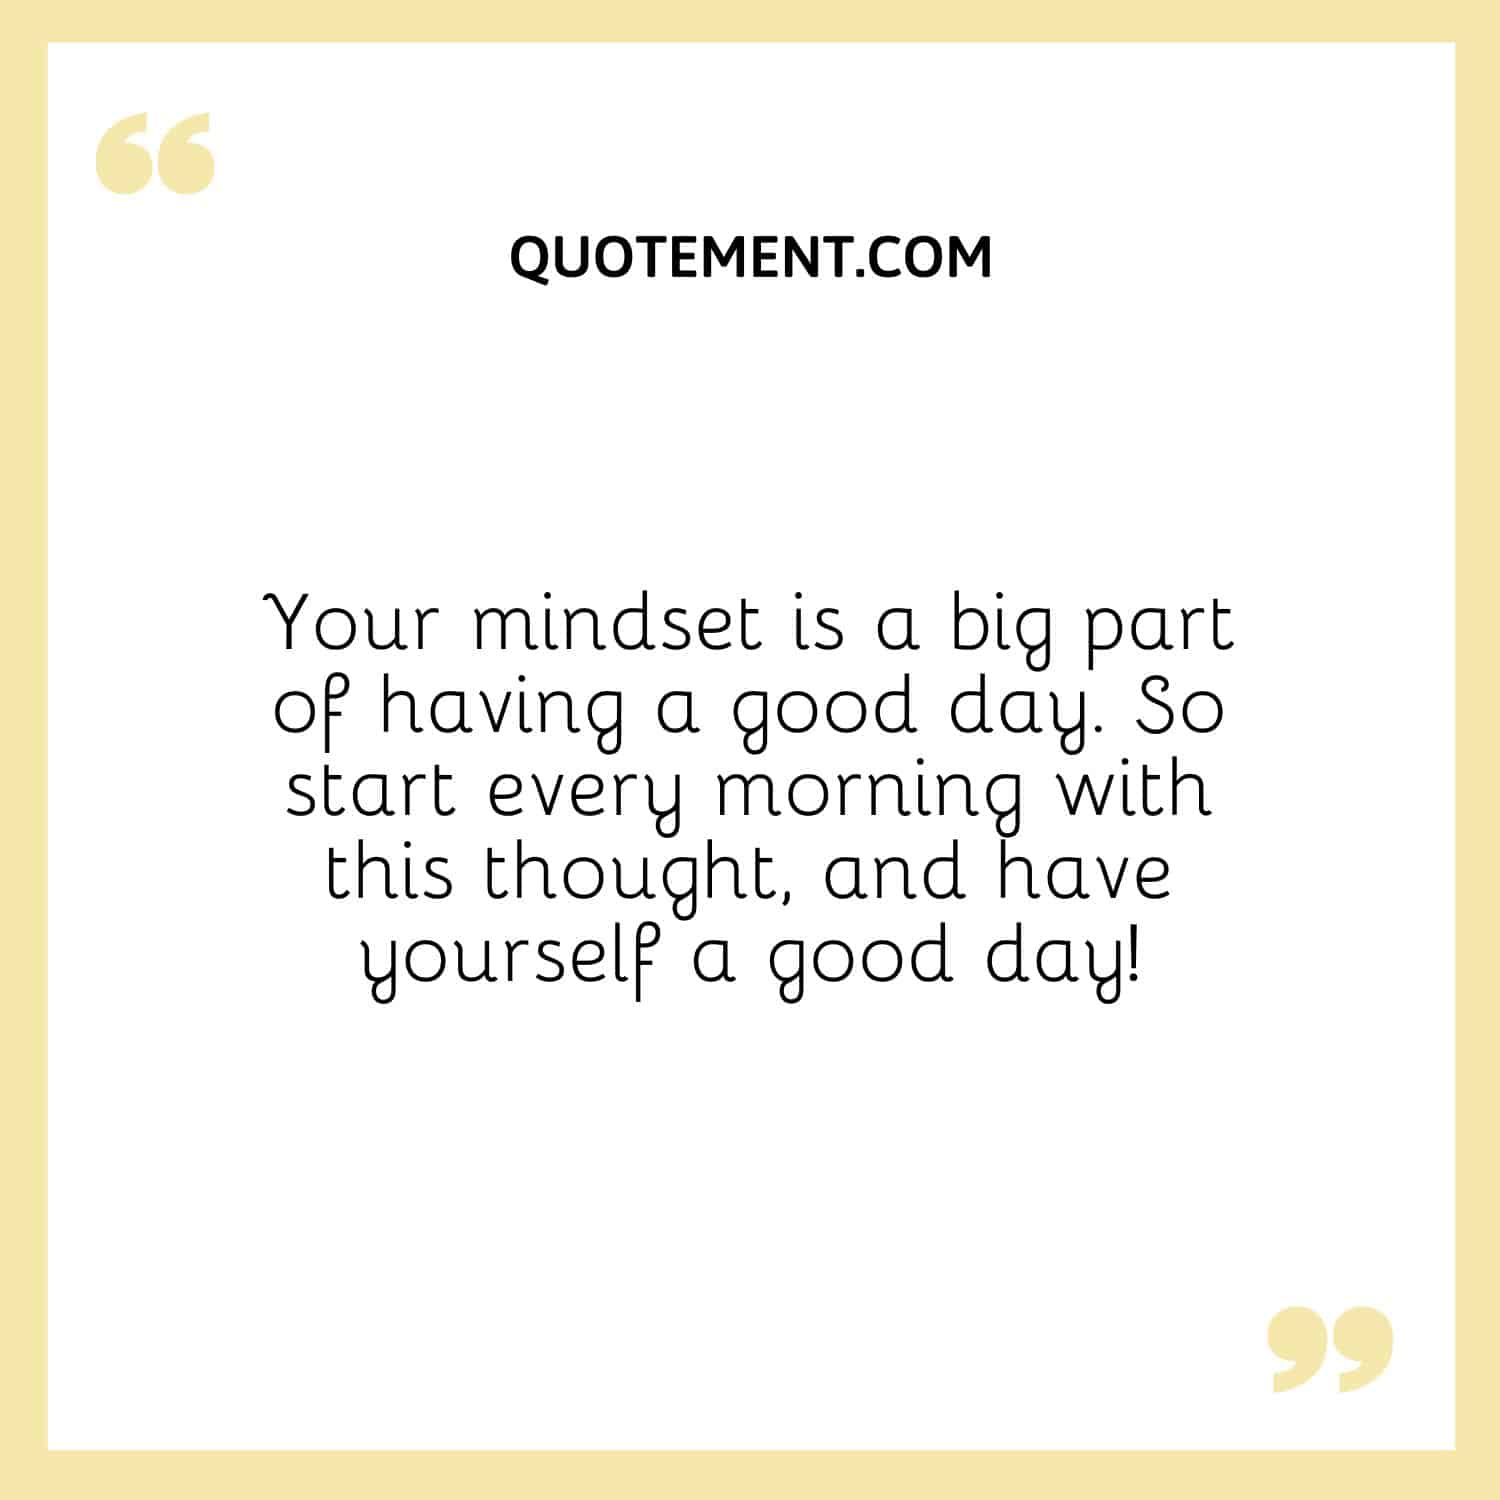 Your mindset is a big part of having a good day